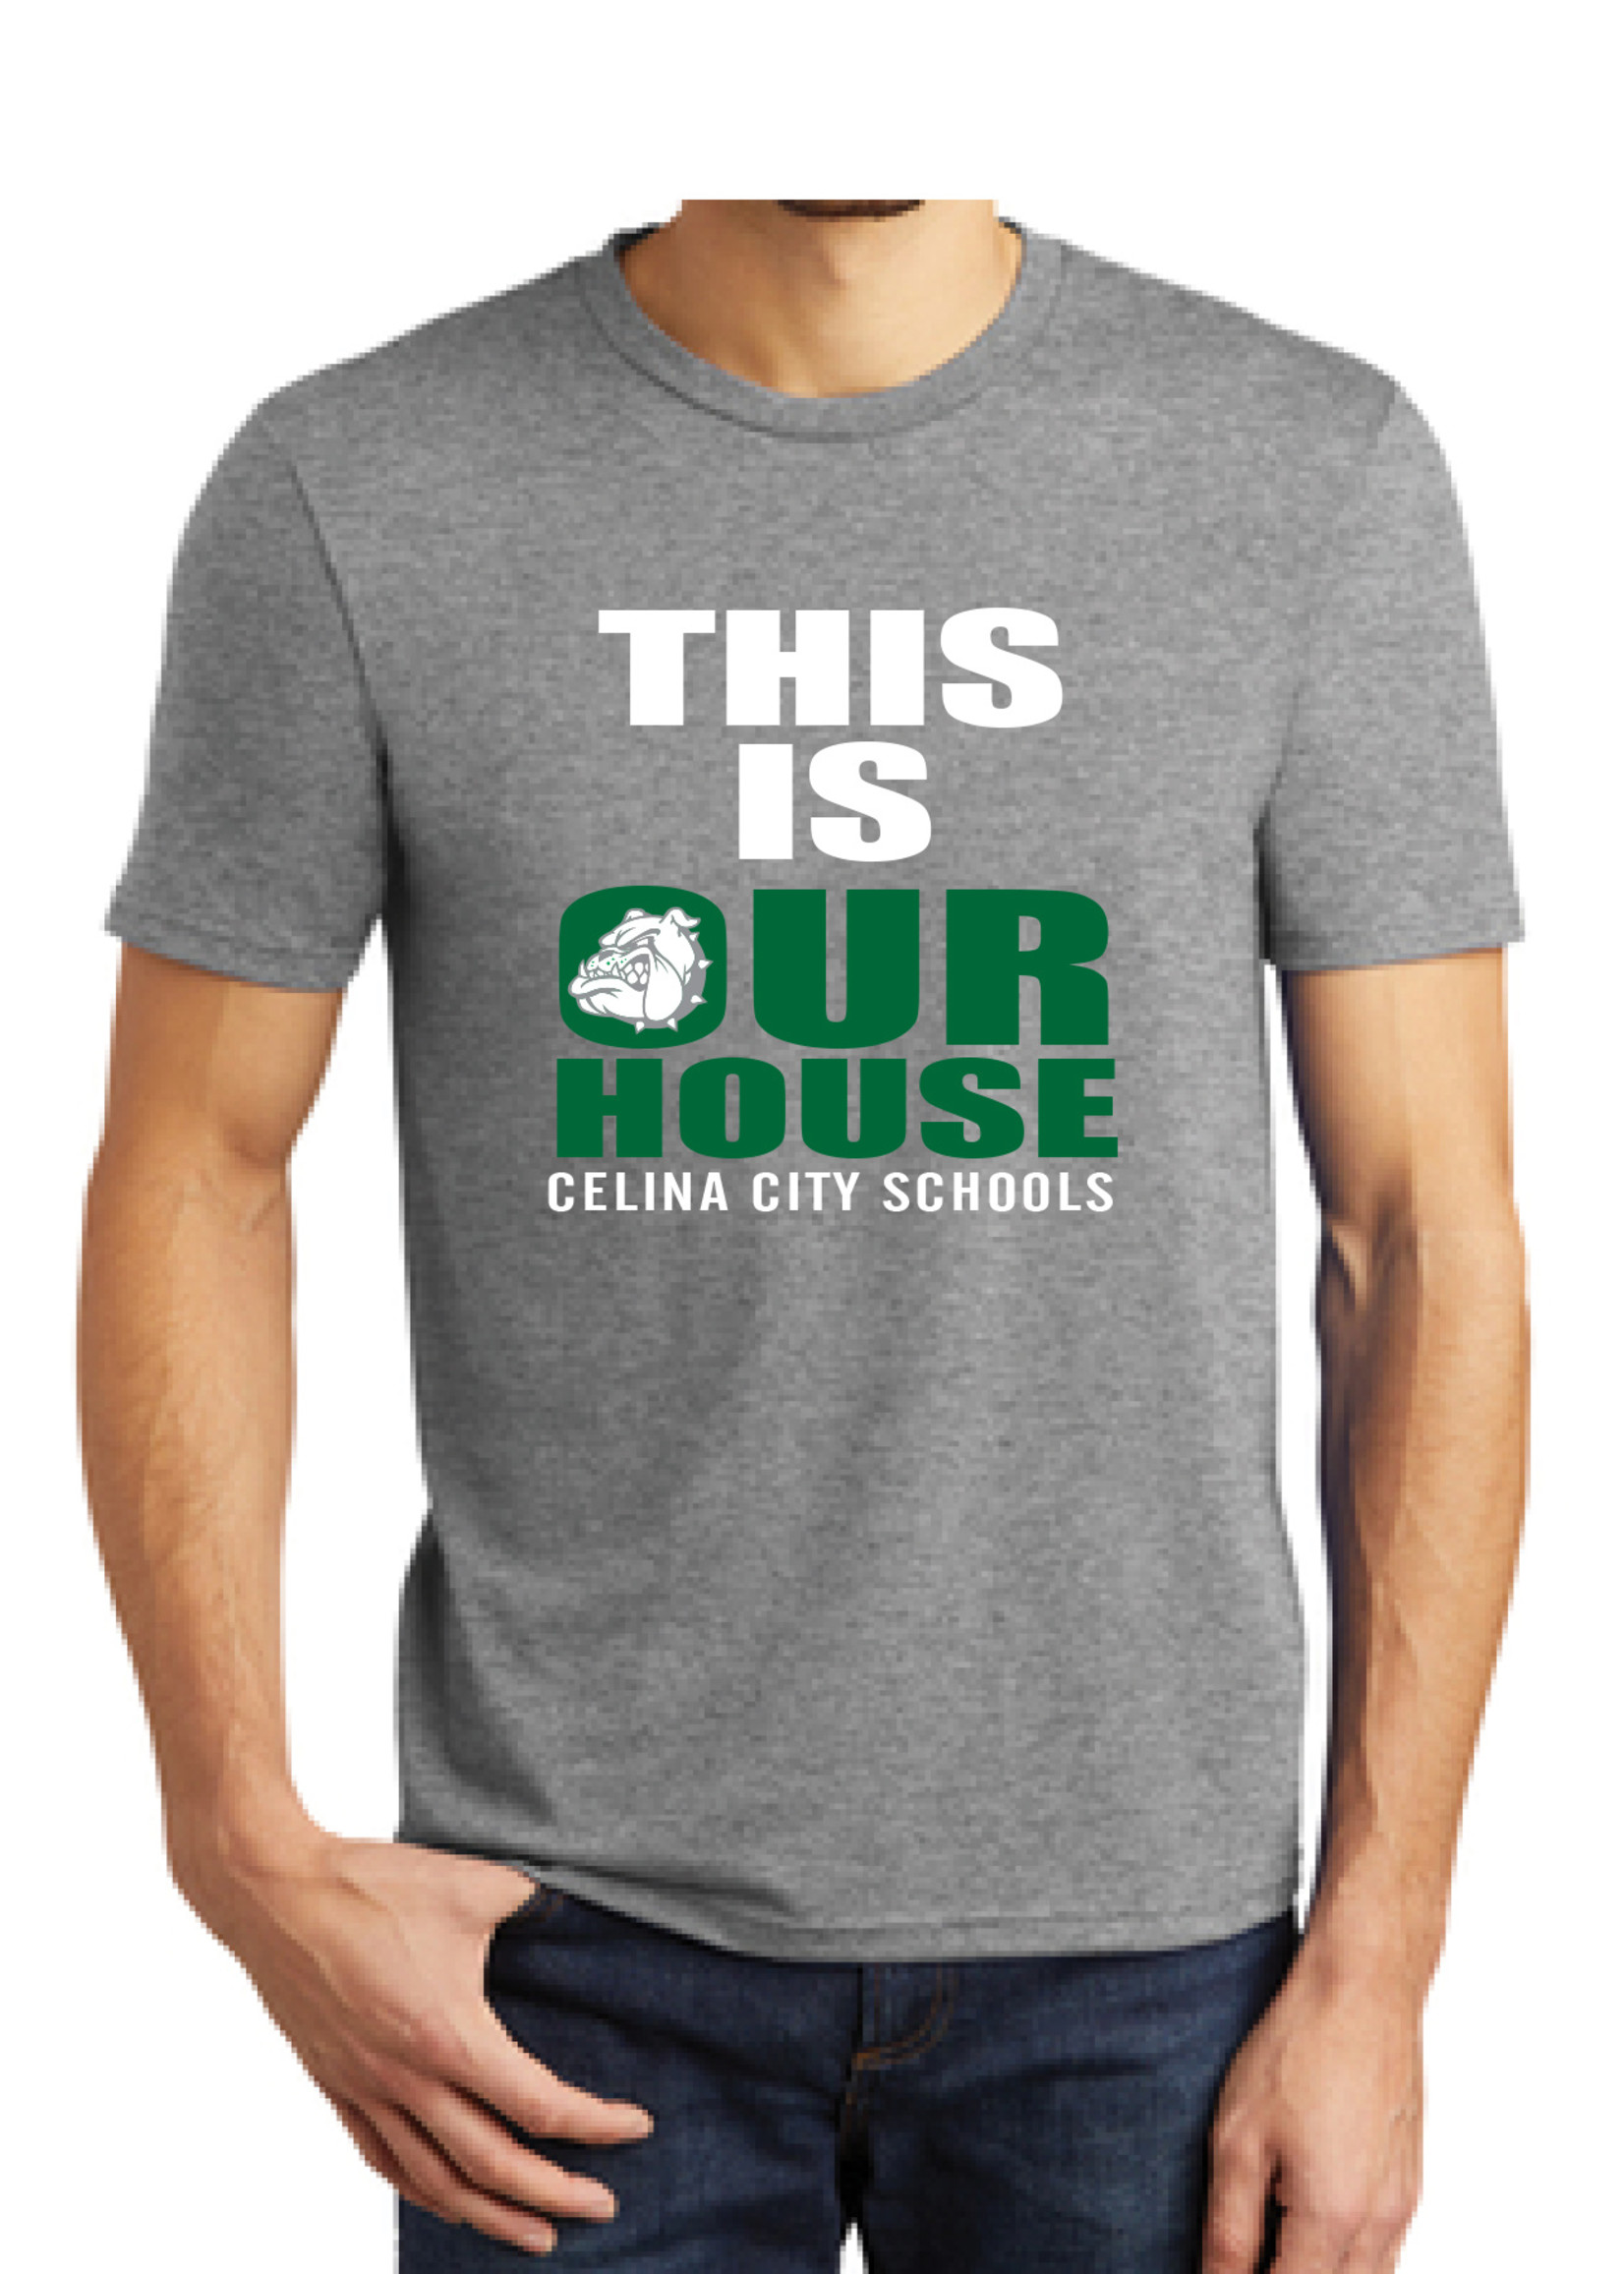 CELINA CITY SCHOOLS - This is Our House